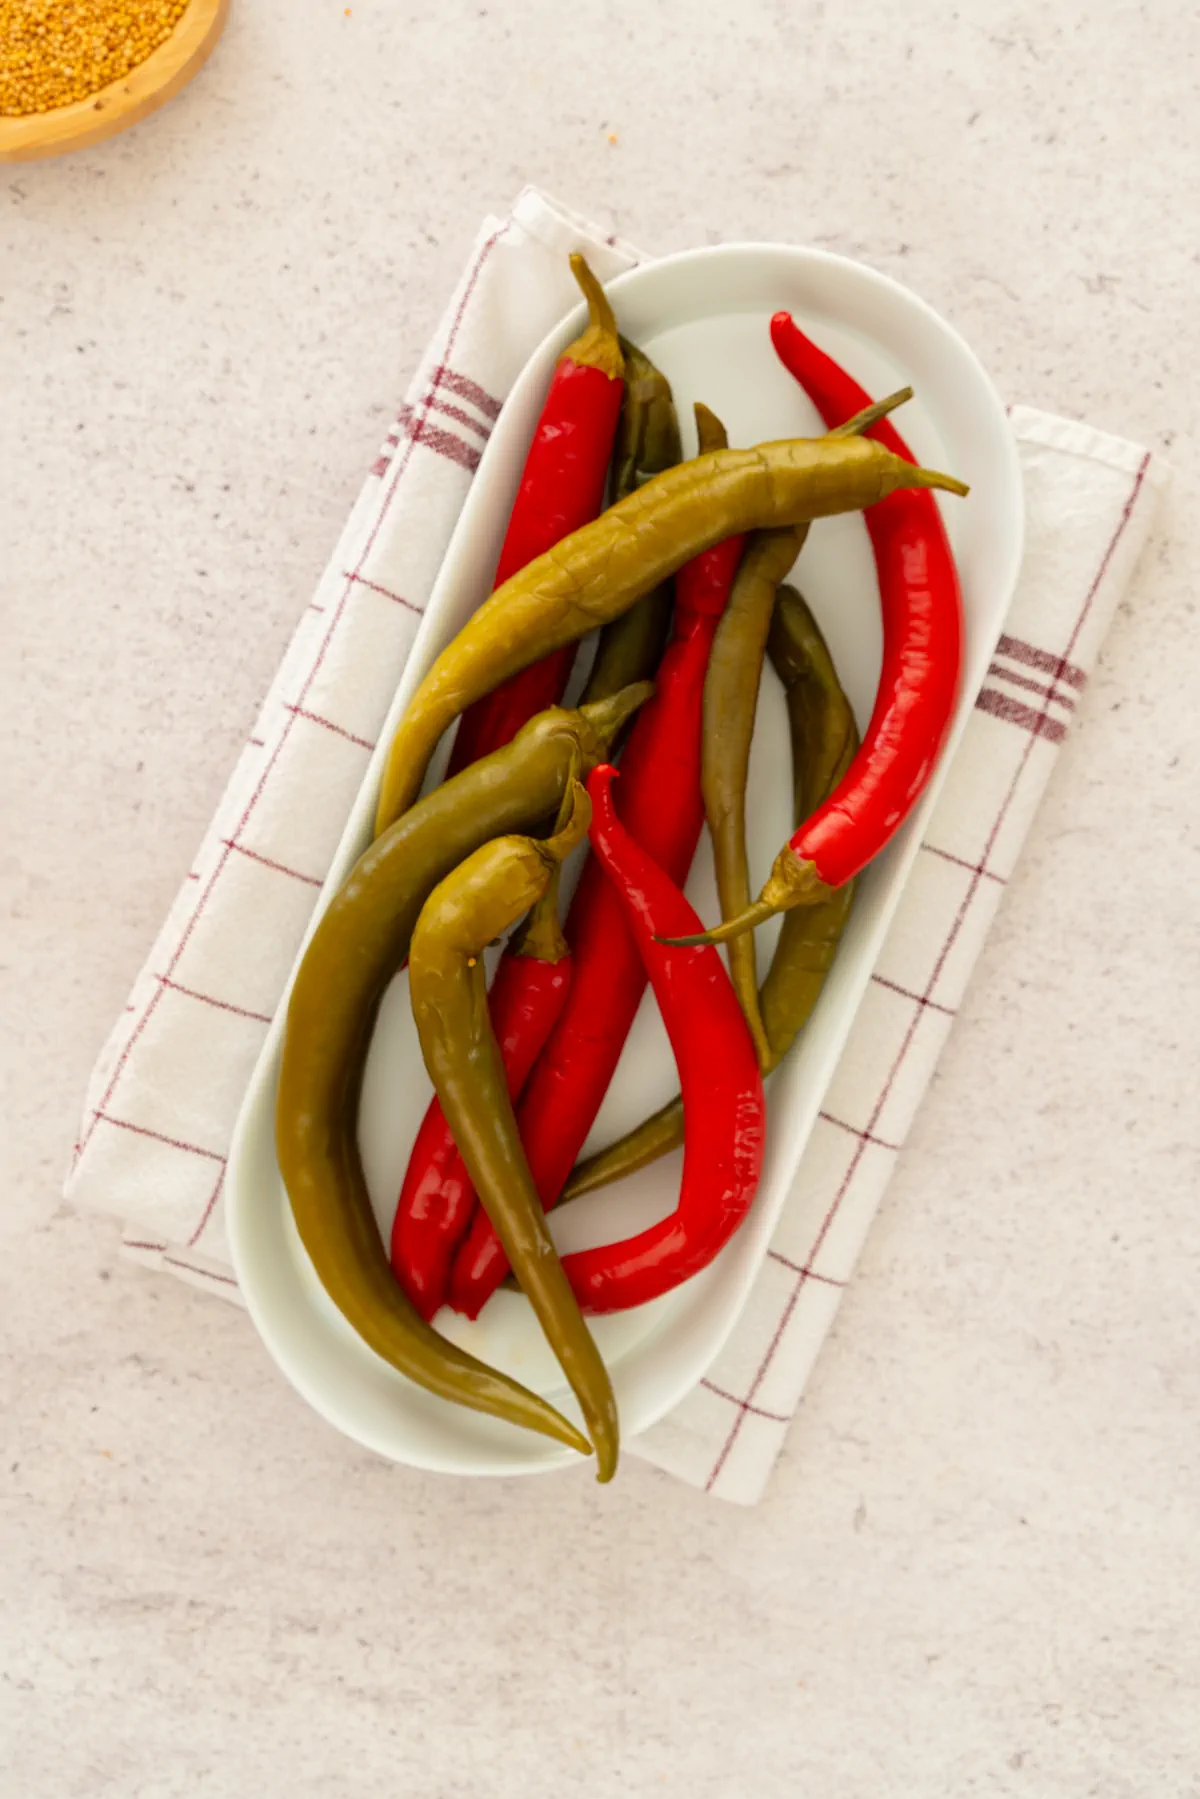 Homemade pickled peppers served on a plate.